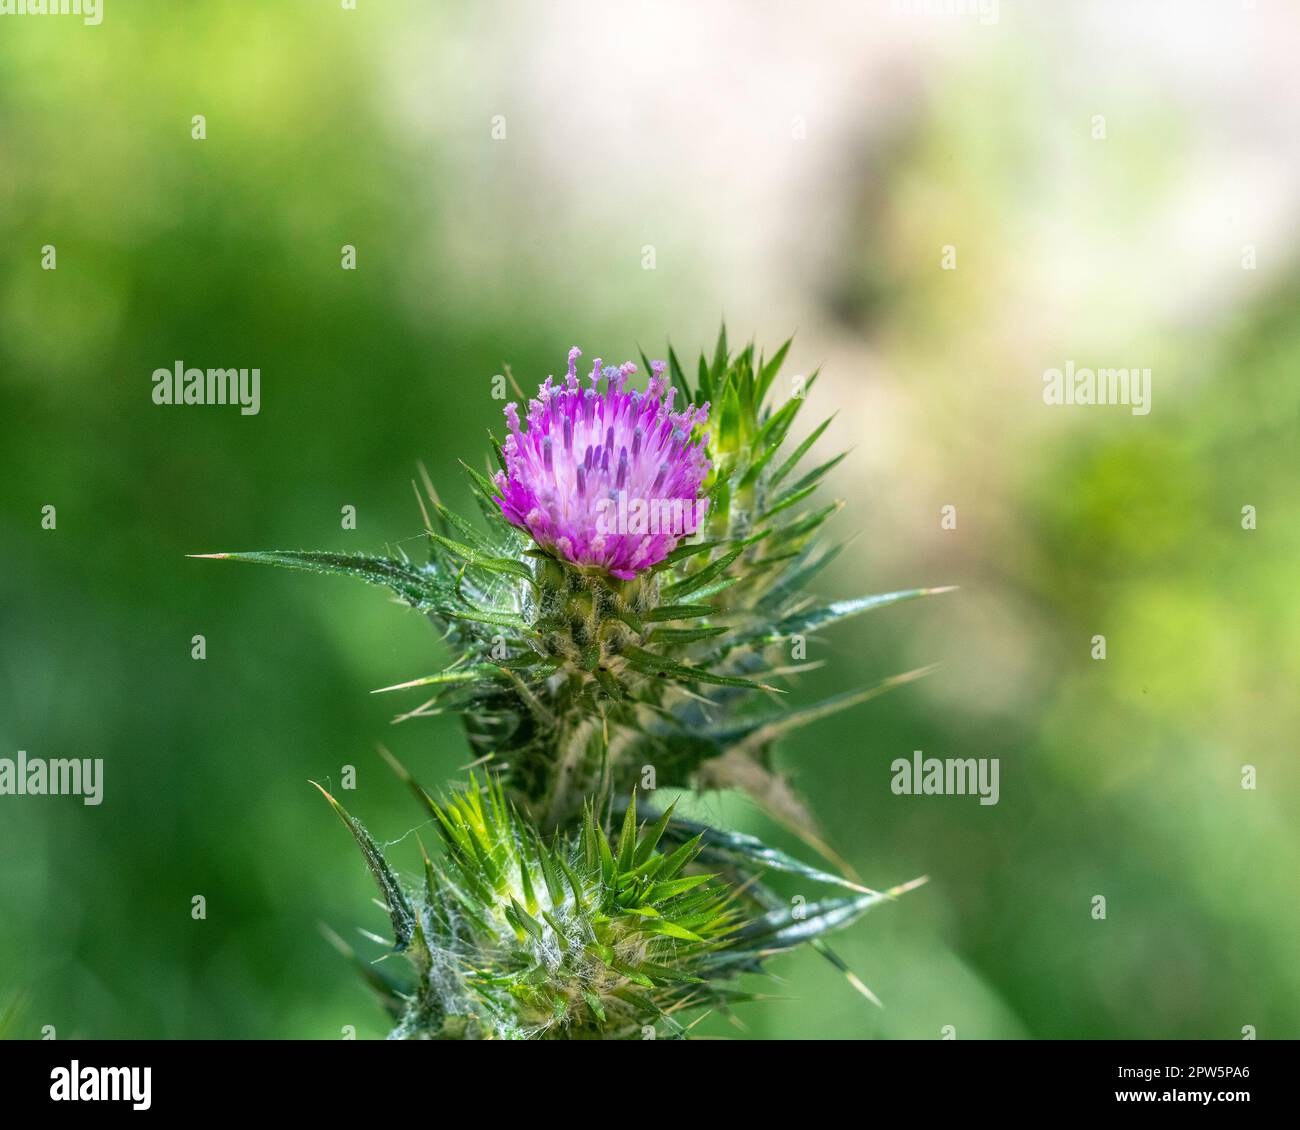 Close up of a blooming flower head from an Italian Thistle (Carduus pycnocephalus) at Lake Hollywood reservoir in Los Angeles, CA. Stock Photo